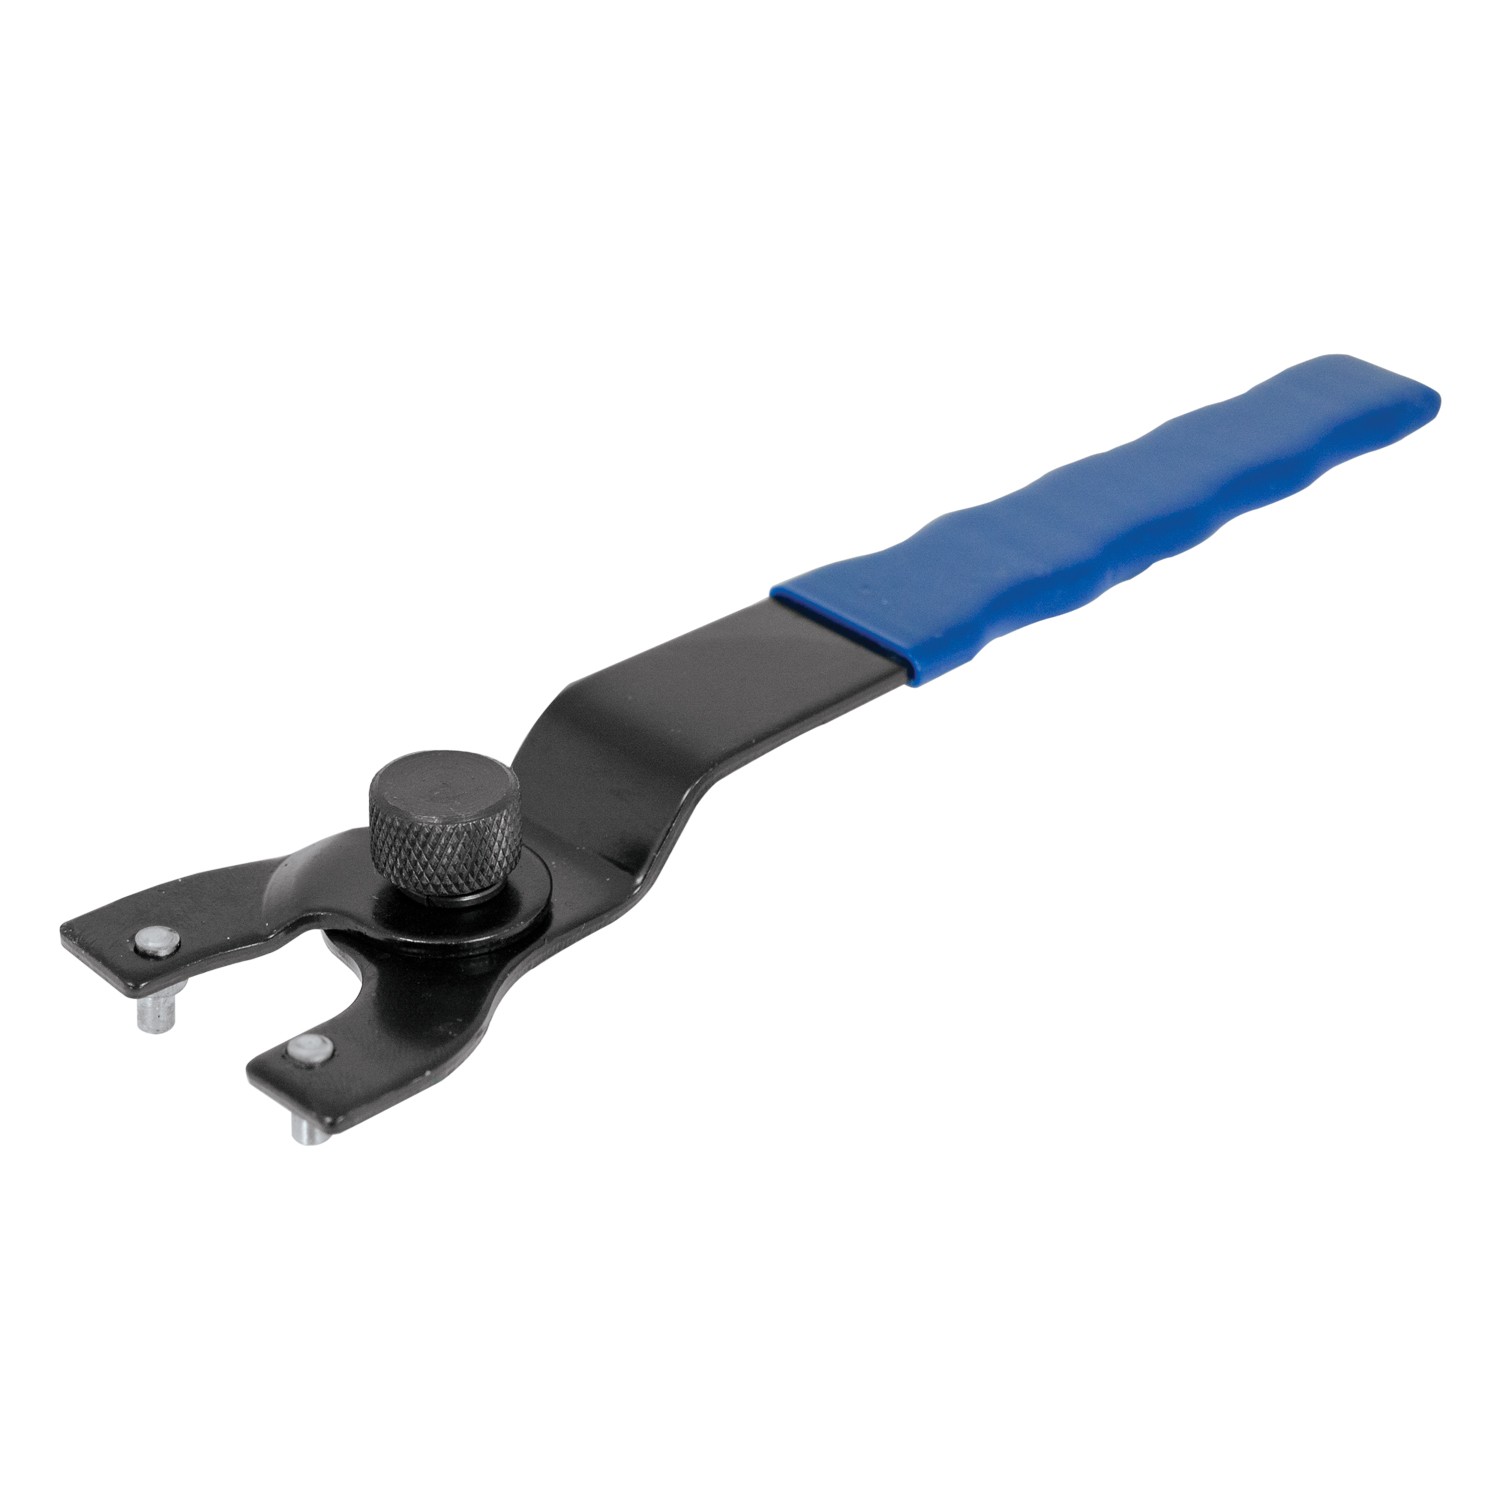 ADJUSTABLE SPANNER WRENCH by AES 1